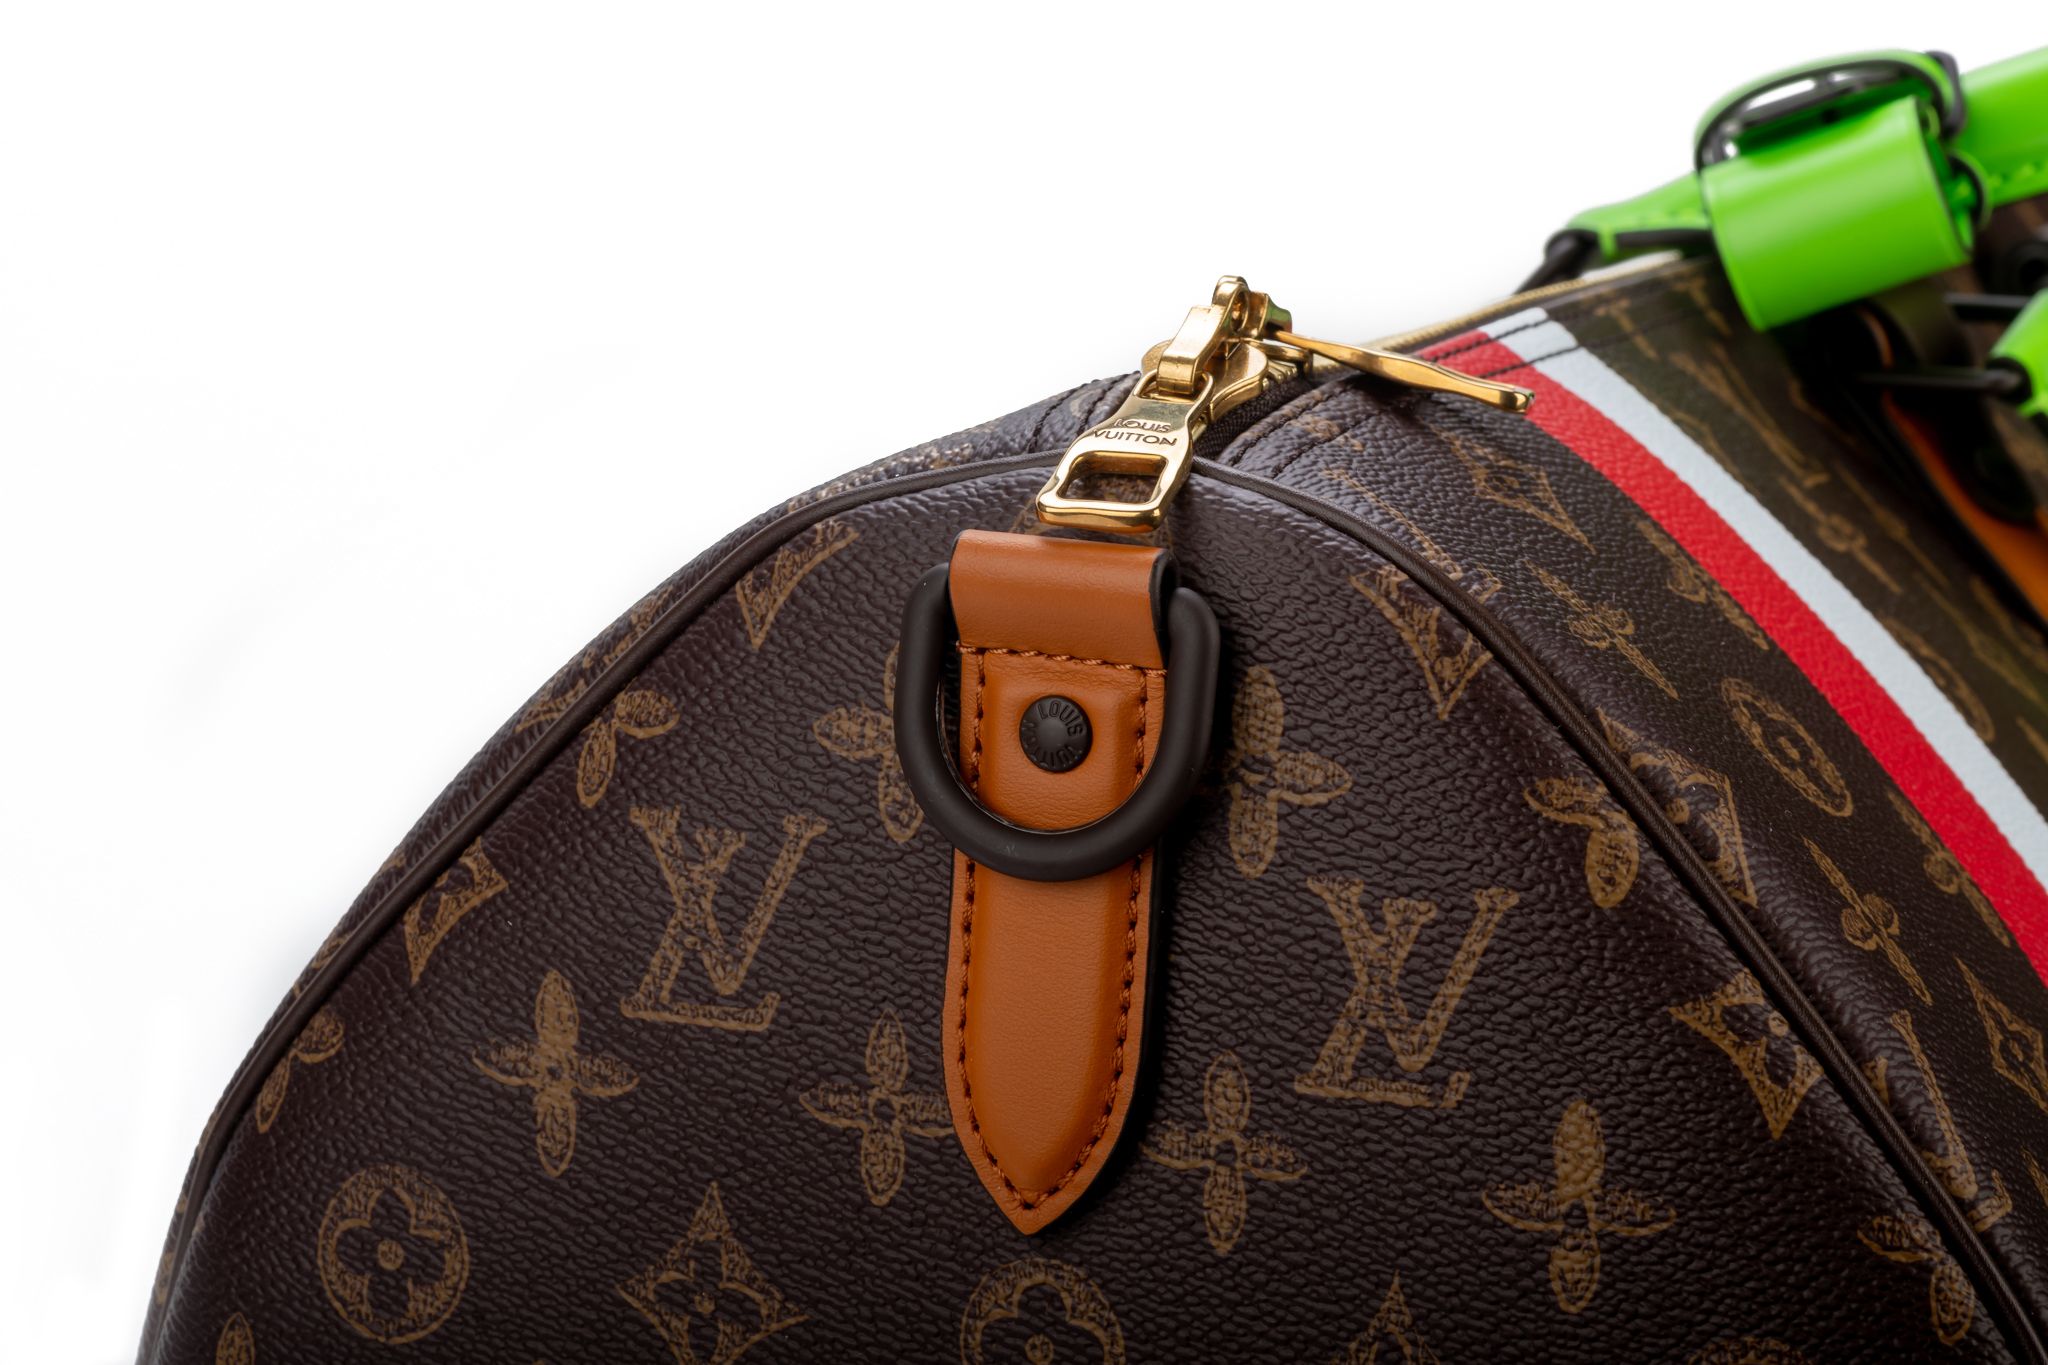 Louis Vuitton Limited Edition Time Trunk Speedy Bandoulière 25 - New* -SOLD